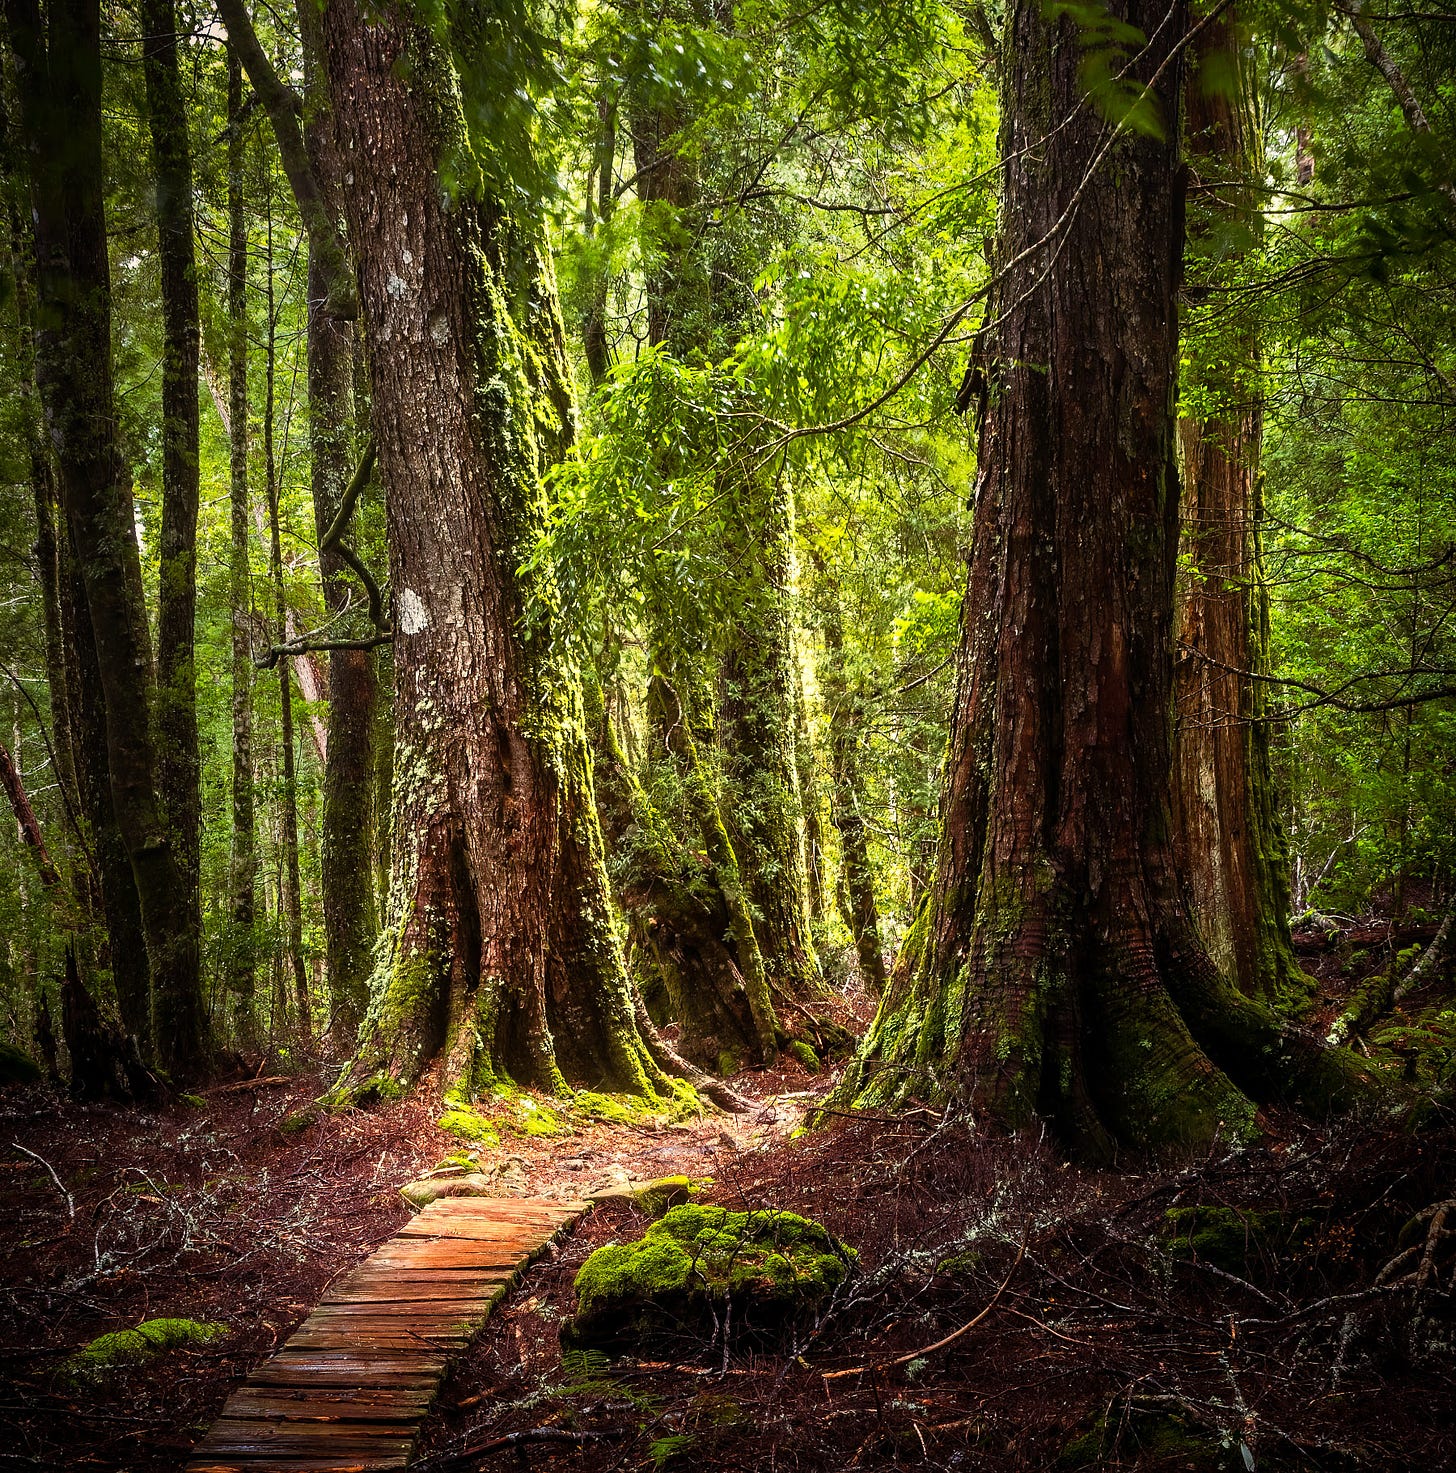 Wooden path ending as track leads between two large trees into the forest